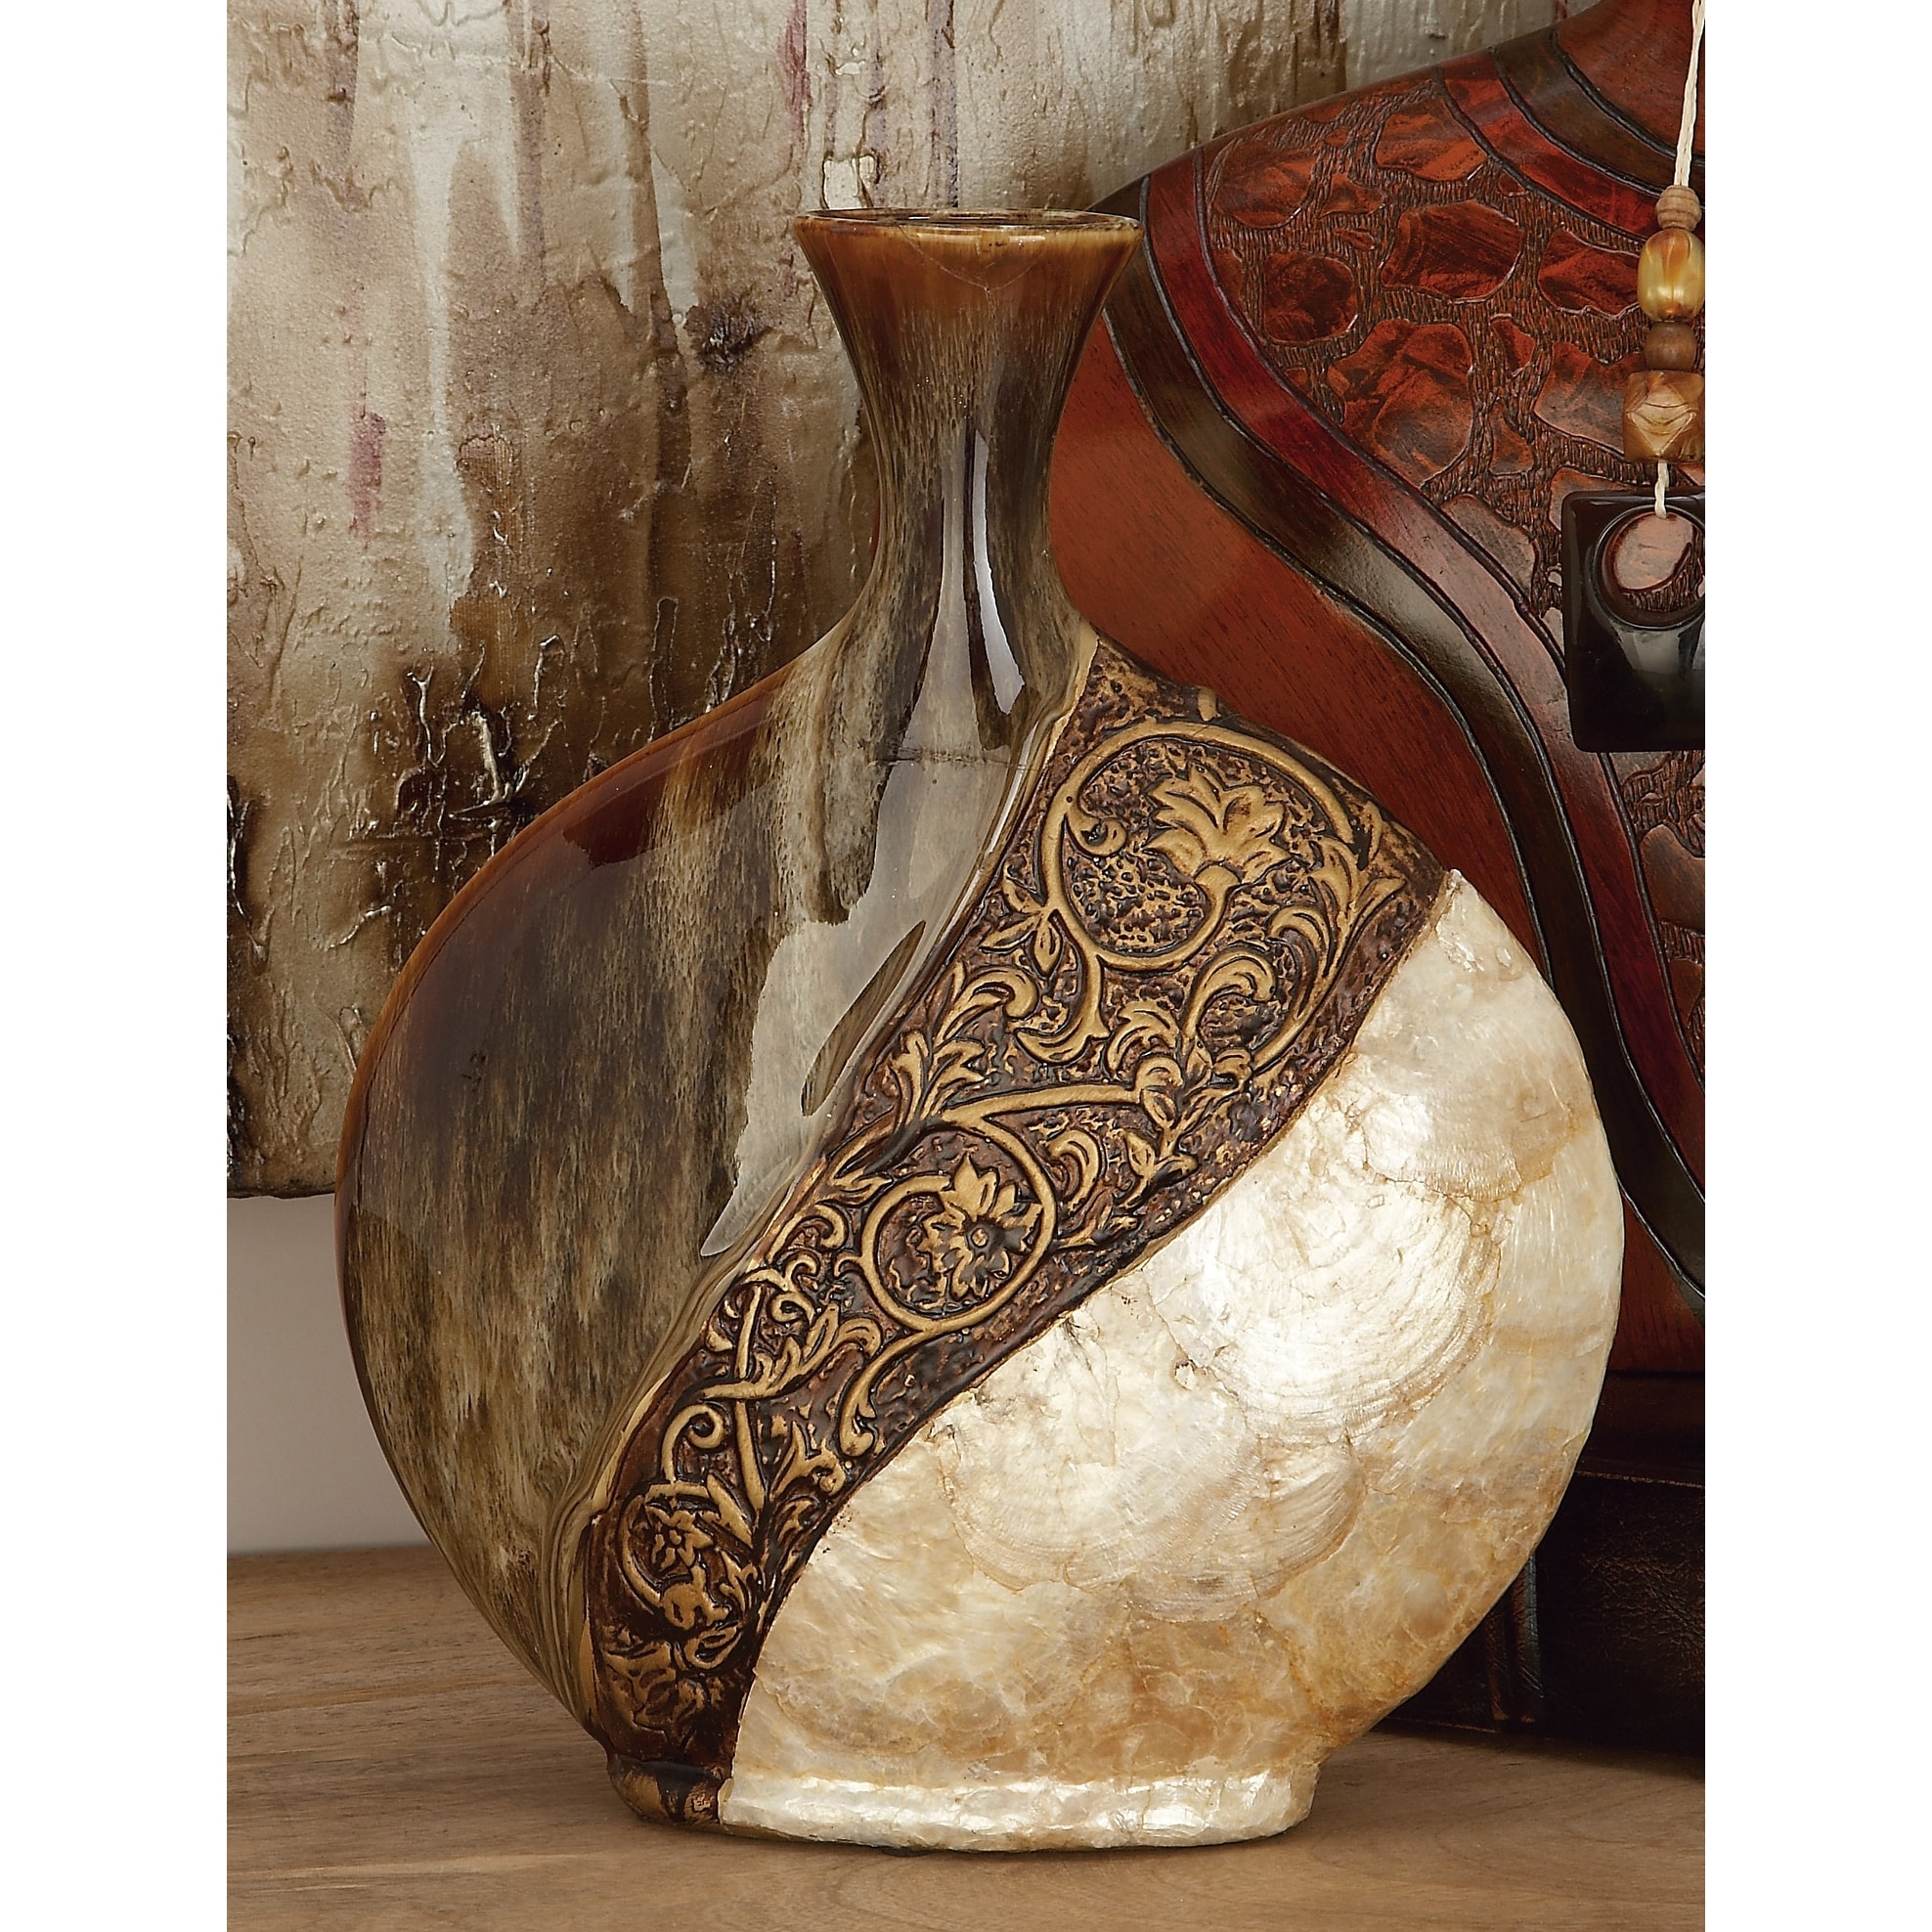 https://ak1.ostkcdn.com/images/products/is/images/direct/b3df40b13057ba96b7f4f2a456545b17f2e5795a/Brown-and-Cream-Ceramic-Capiz-Shell-Traditional-Novelty-Vase.jpg